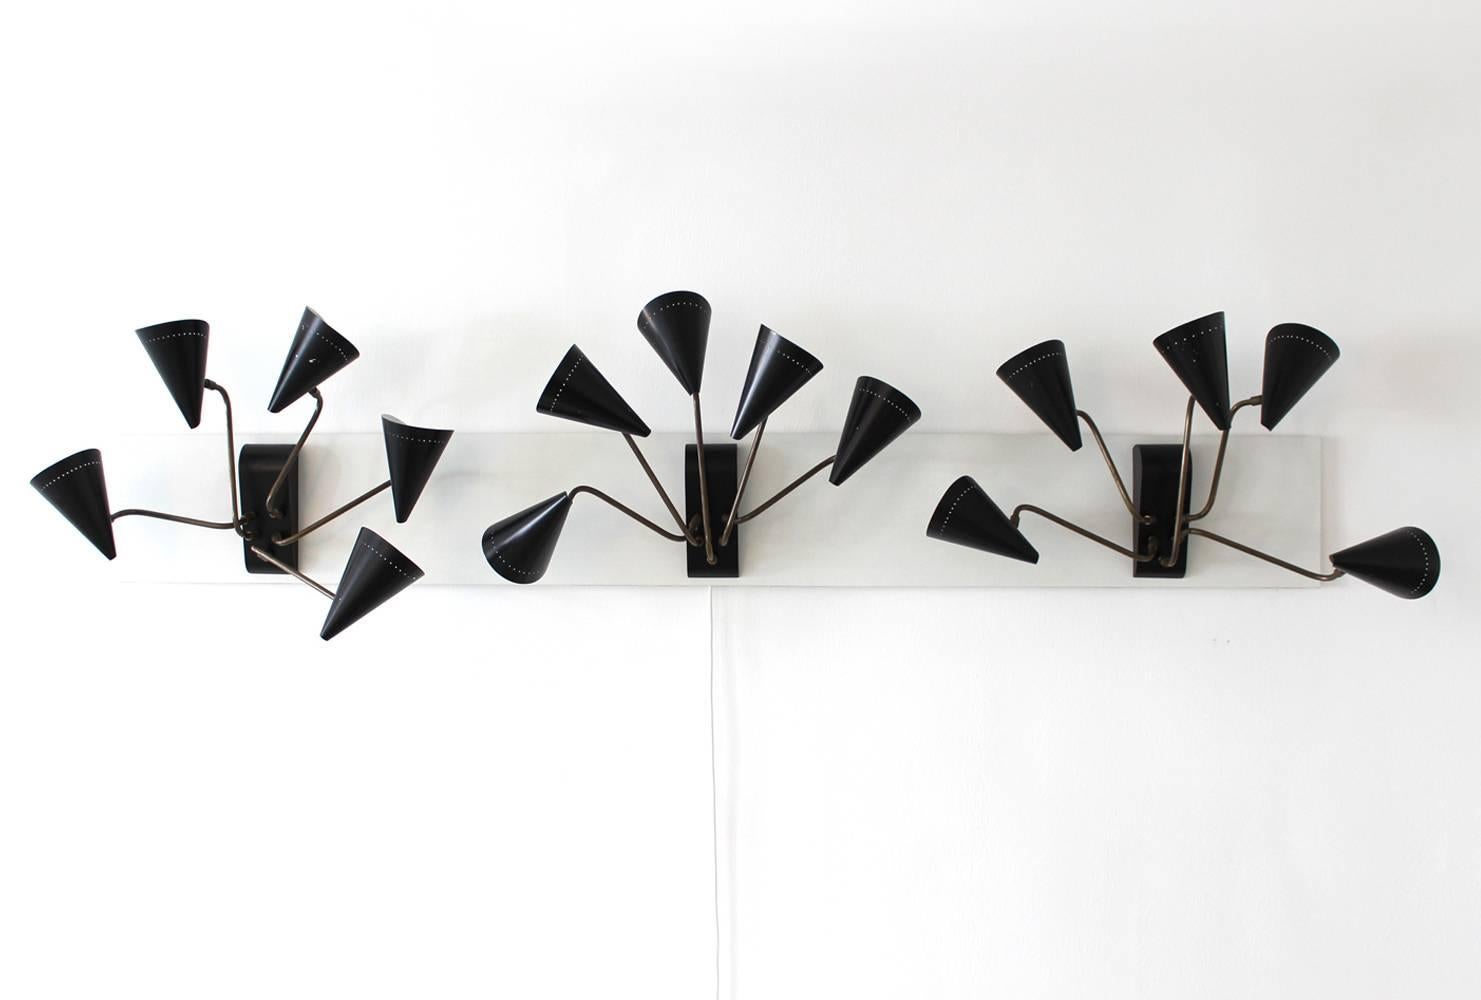 Amazing set of three French wall lamps from 1950 in the style of Royere
Each lamp has a black lacquered metal base with five movable arms.
The 15 movable arms can be turned in different directions and angles, the lamps can be changed in various